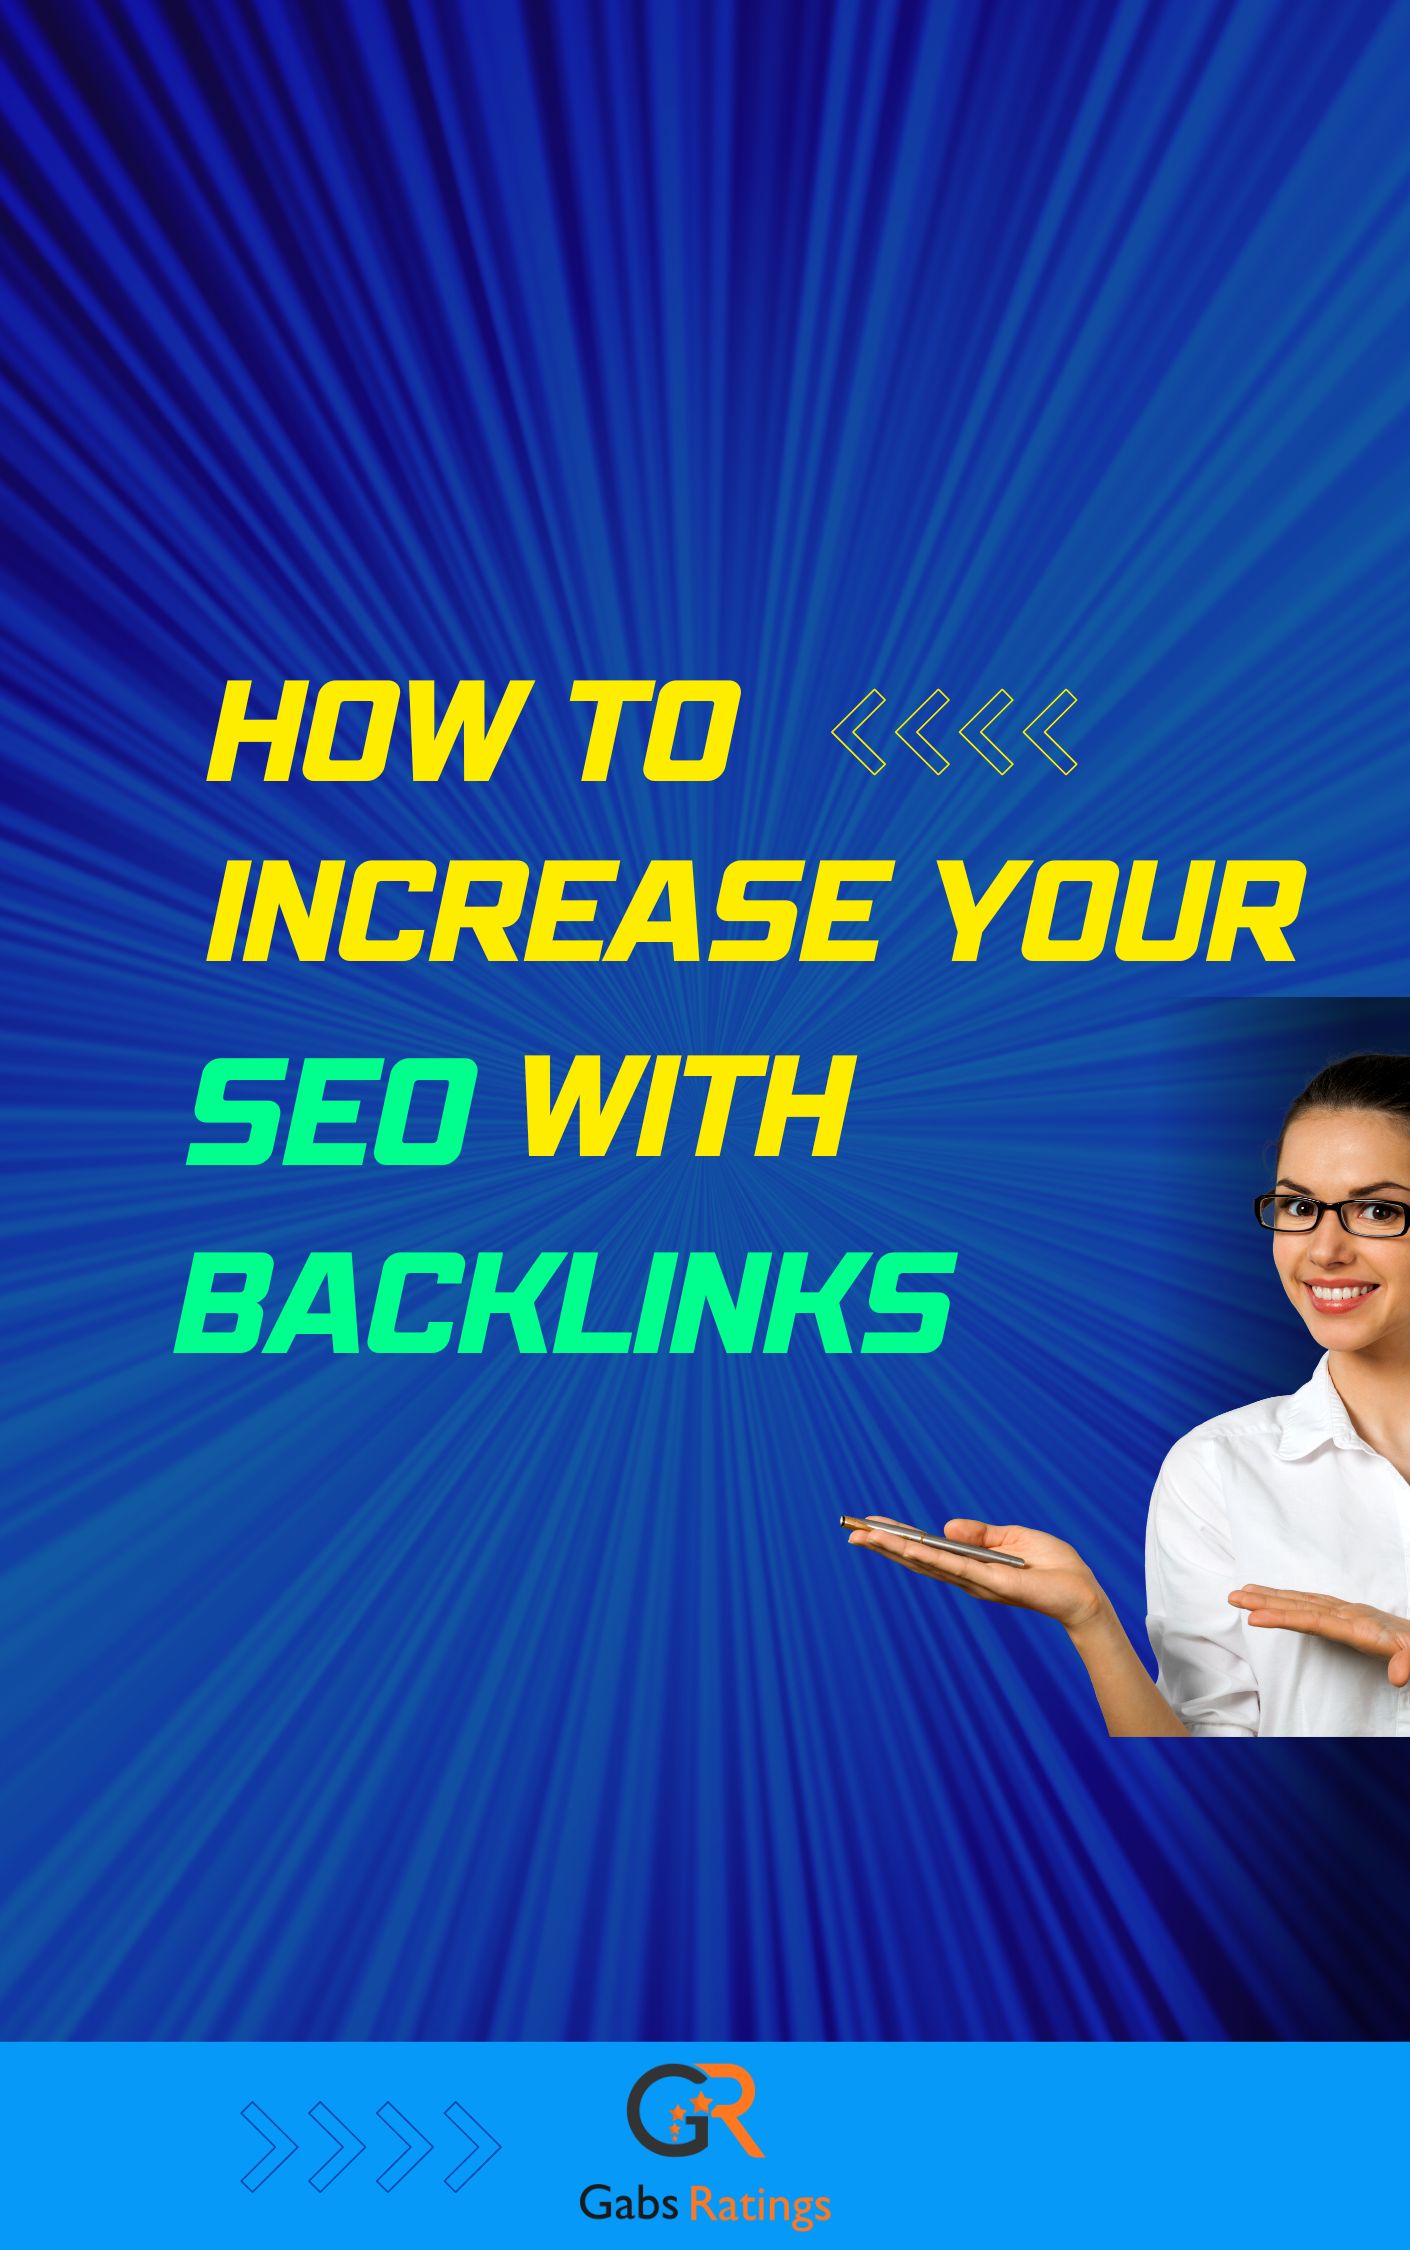 The Ultimate Guide to Increasing Your SEO with Backlinks